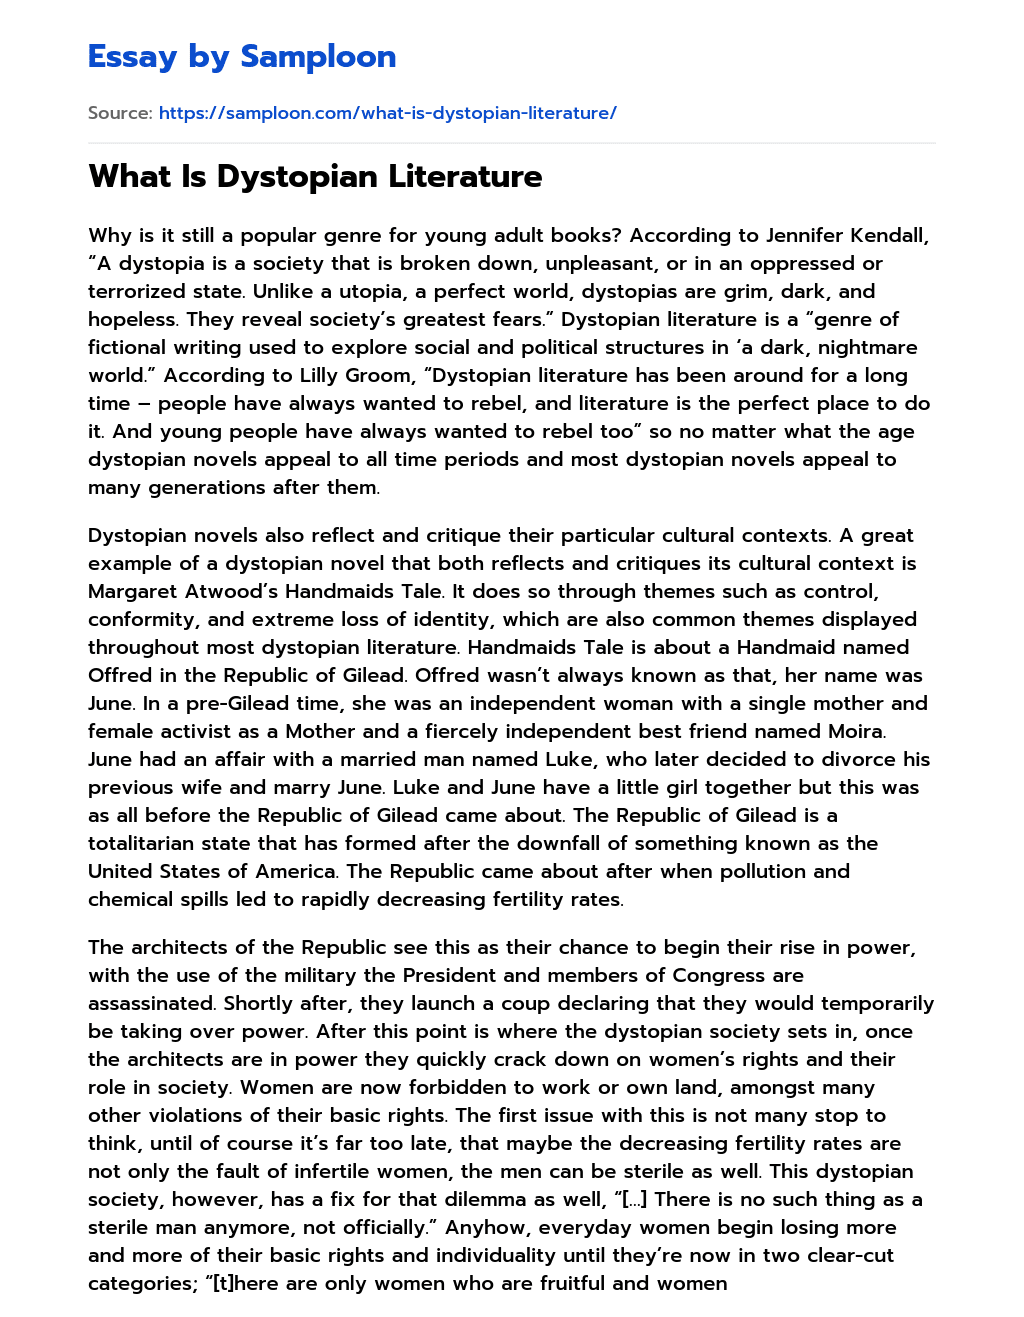 What Is Dystopian Literature essay